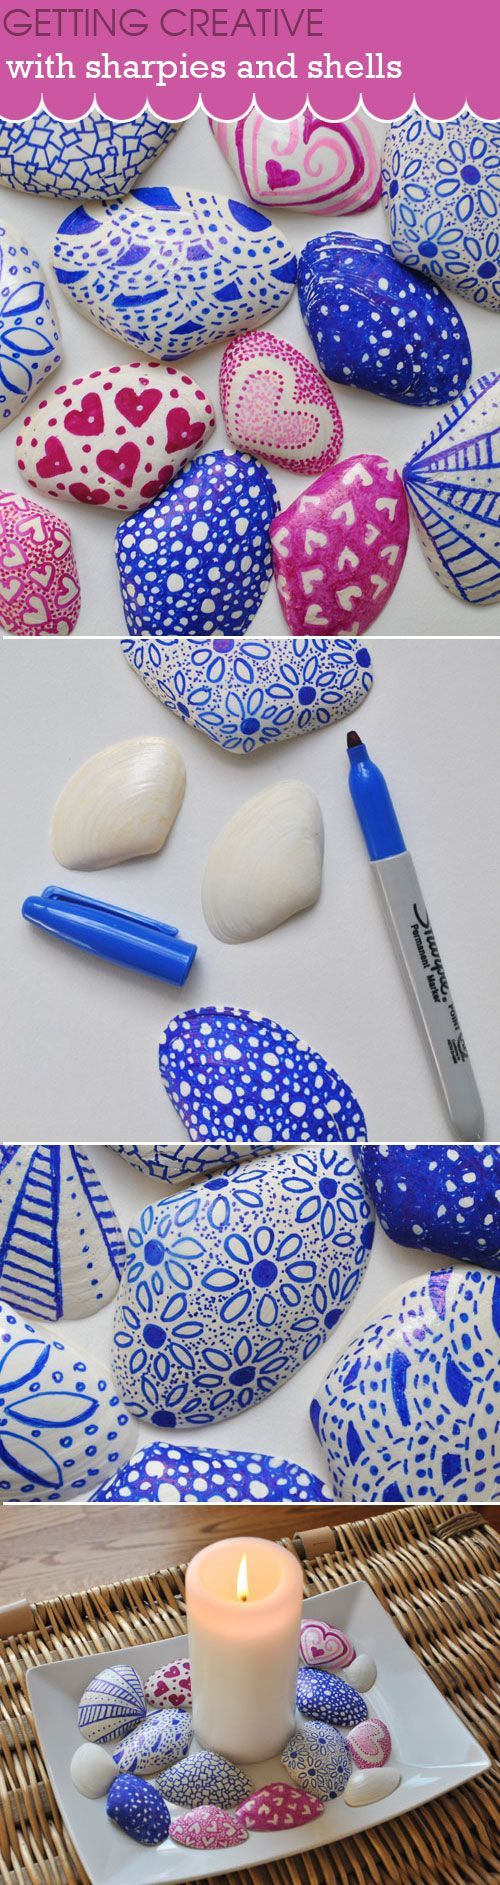 Getting Creative with Shells and Sharpies: Turn boring shells into something beautiful with sharpies.